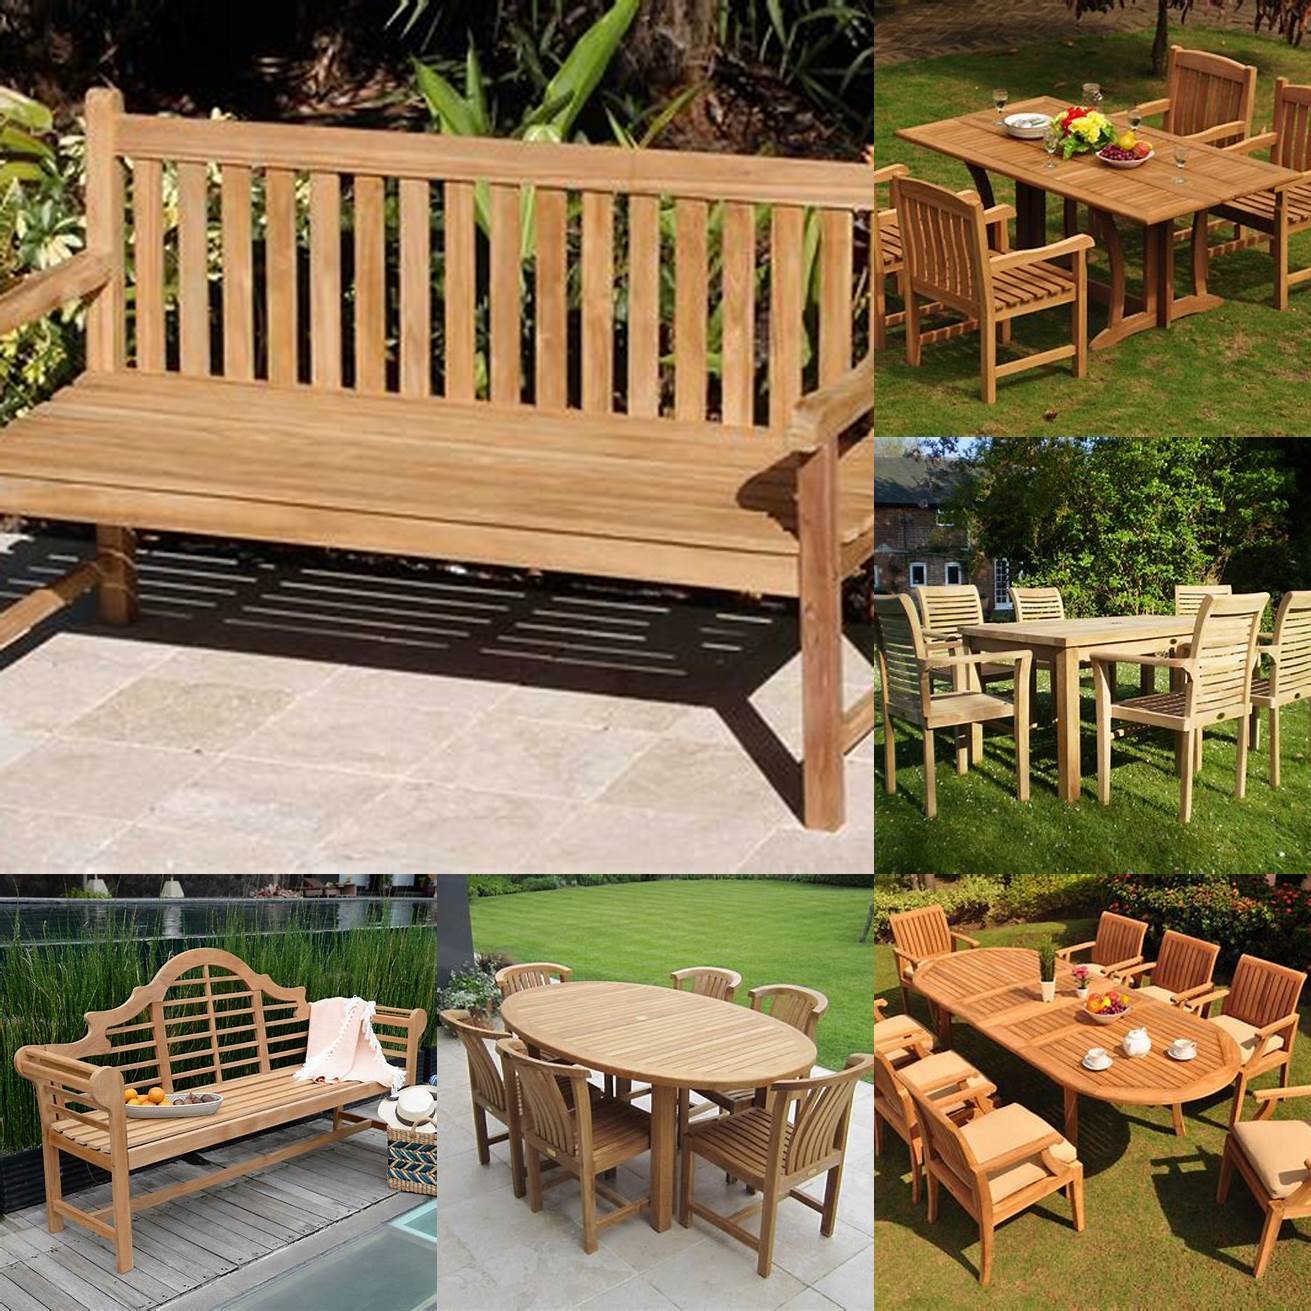 Teak Patio Table with Benches